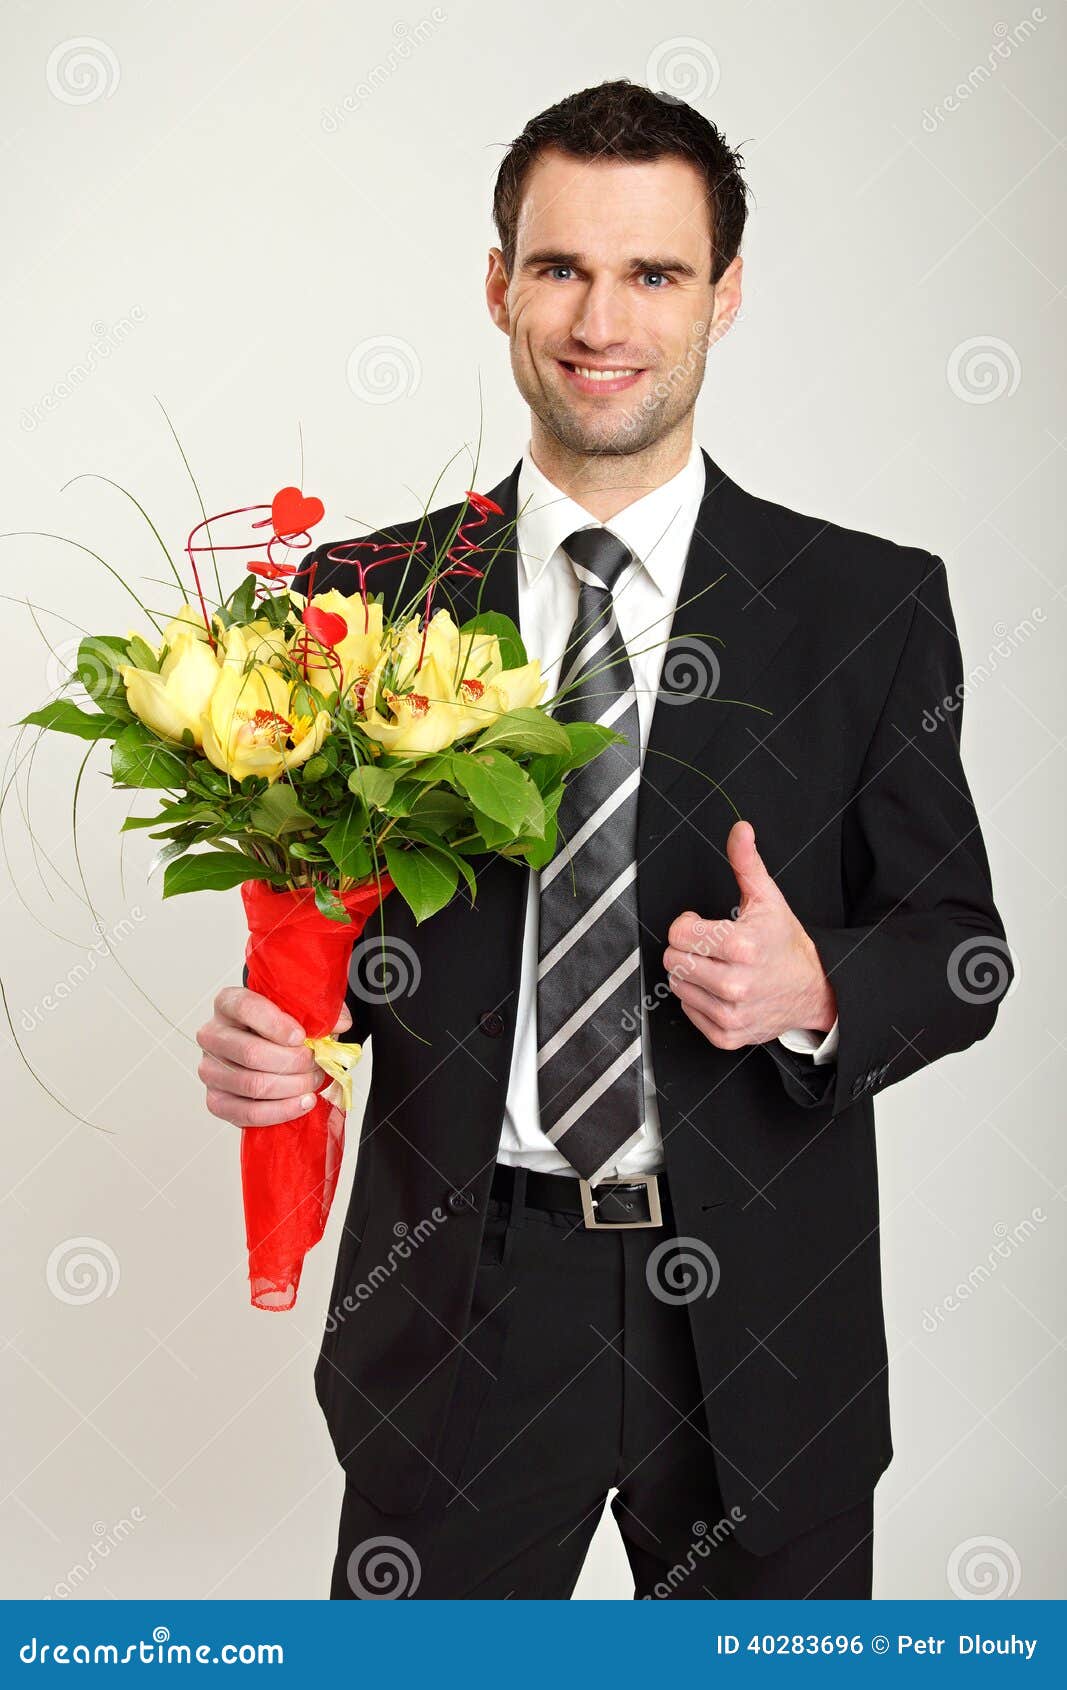 Man with Bouquet of Orchids Stock Photo - Image of gift, cheerful: 40283696